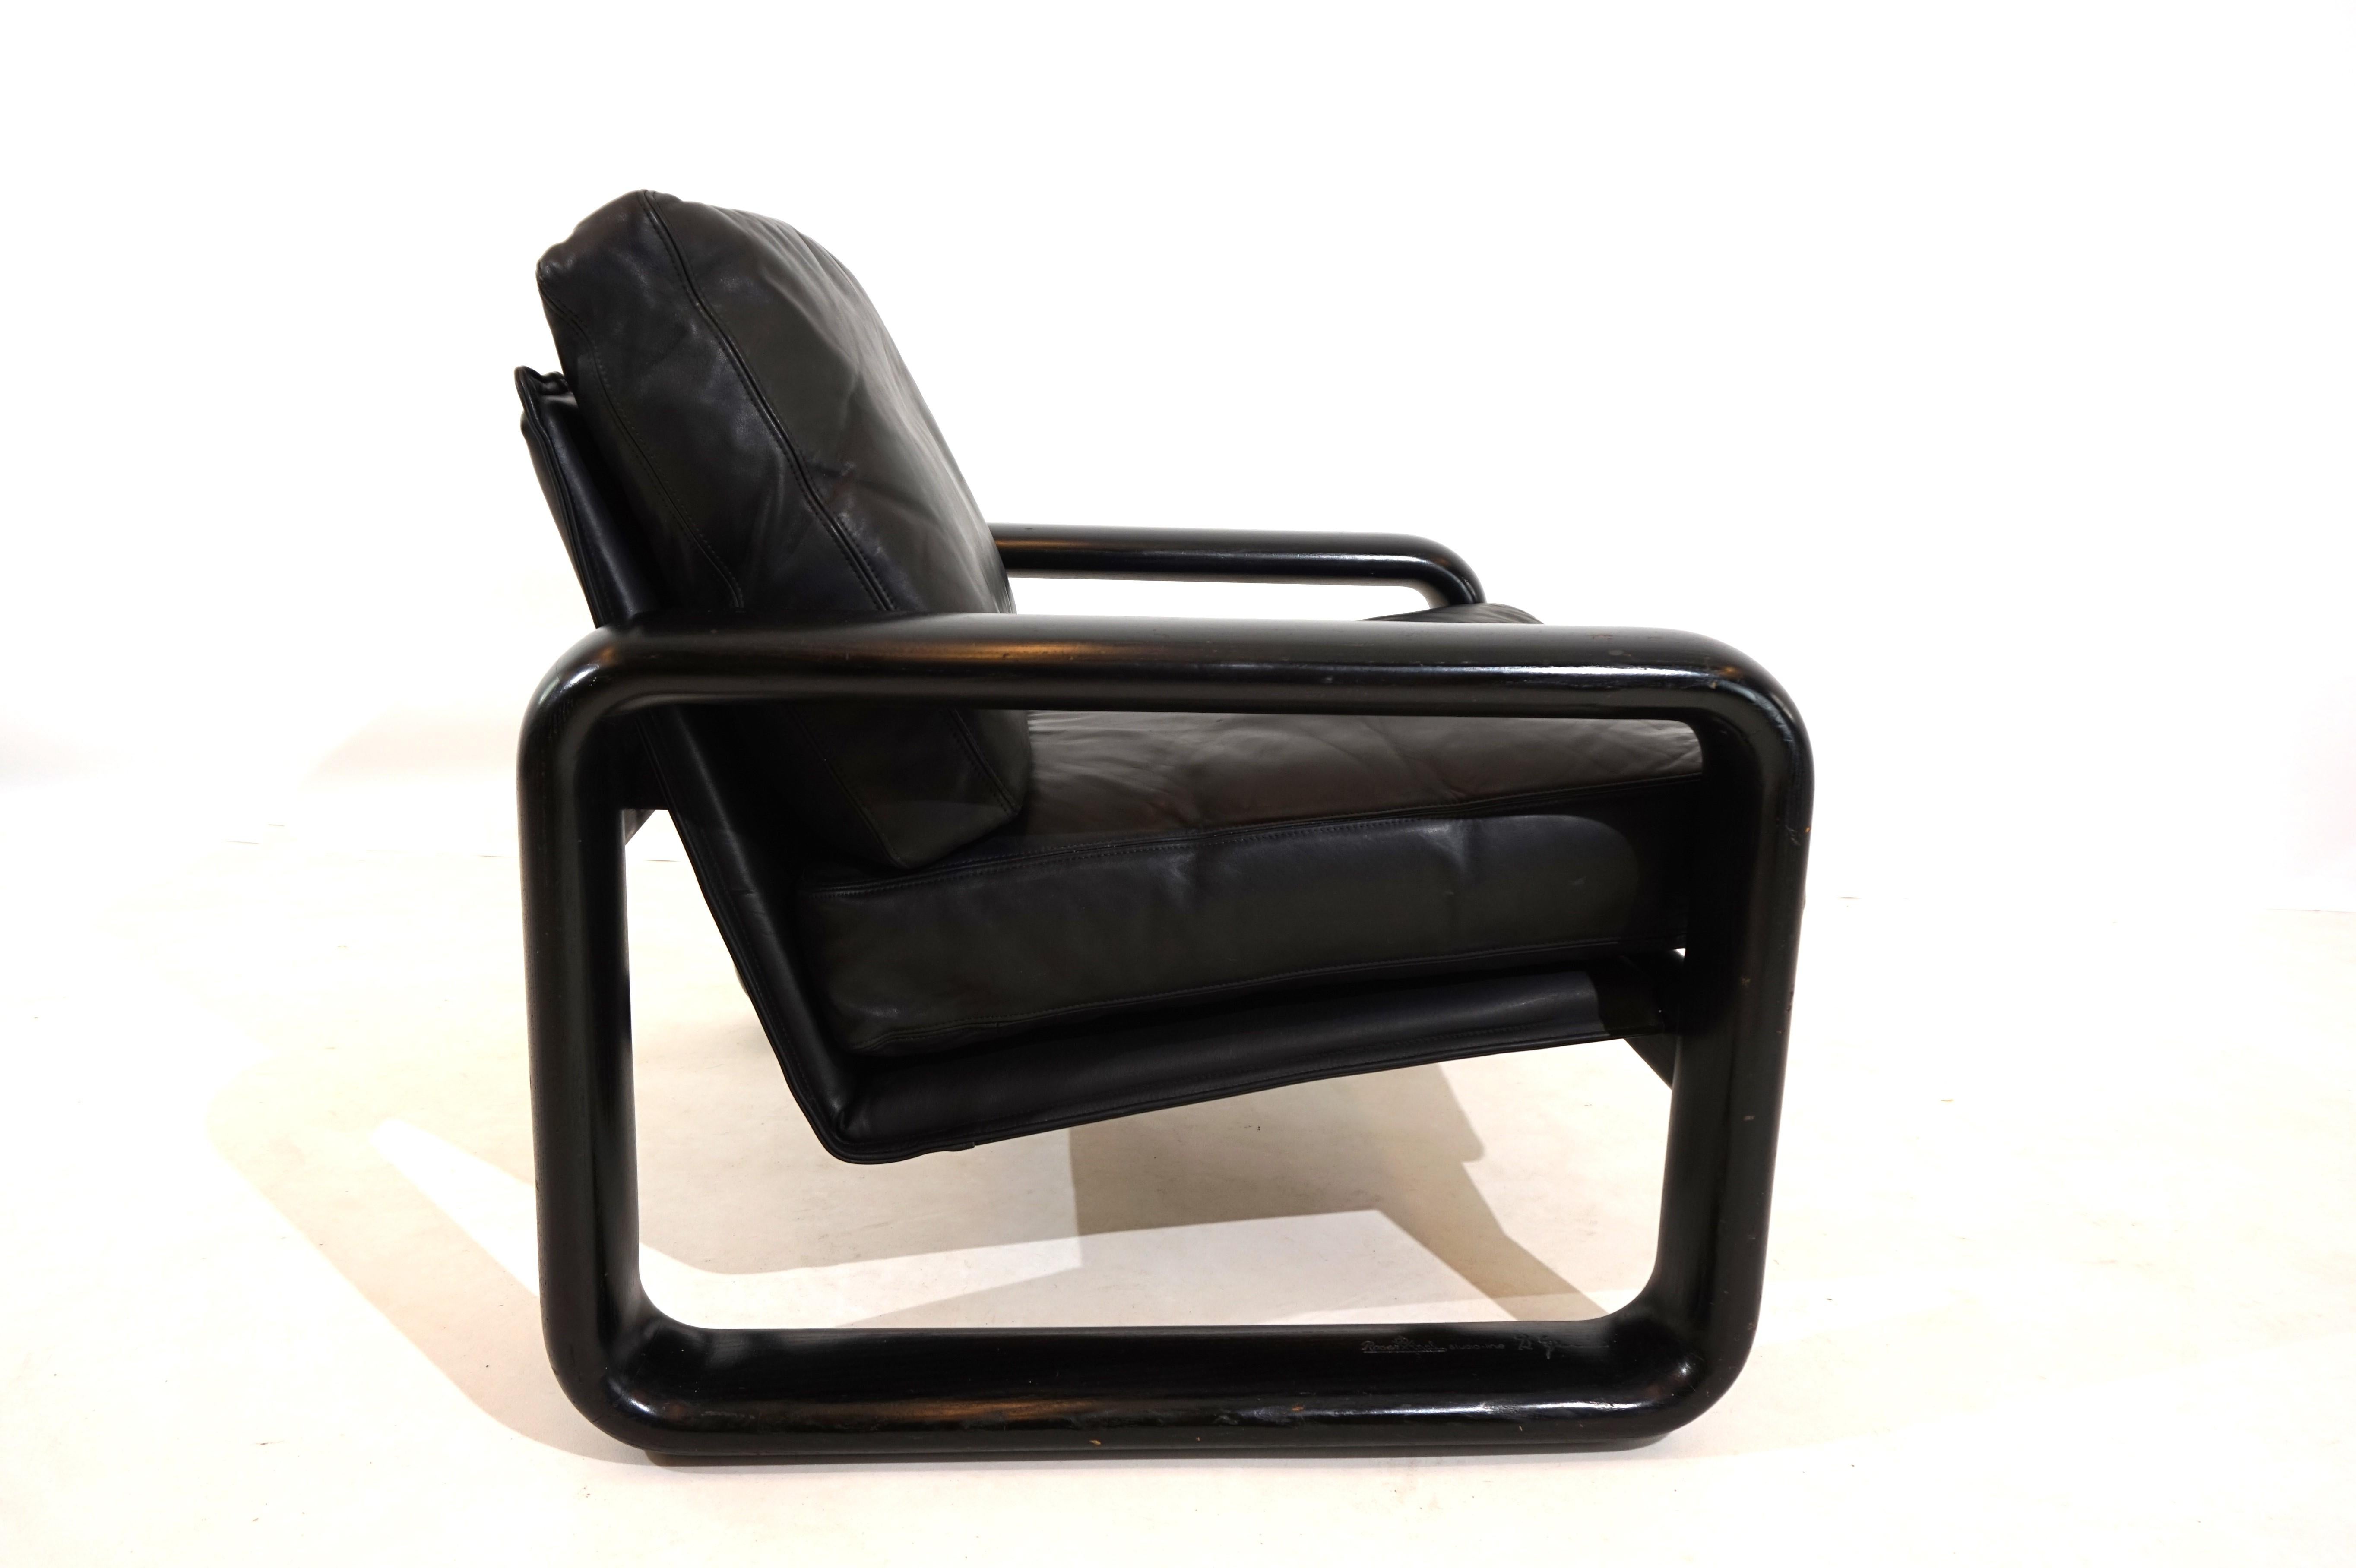 A Hombre leather armchair in the popular version with a black wooden frame and black leather in very good condition. The leather of the cushions and backrest shows hardly any signs of wear and is soft and supple. The solid wooden backrests have a